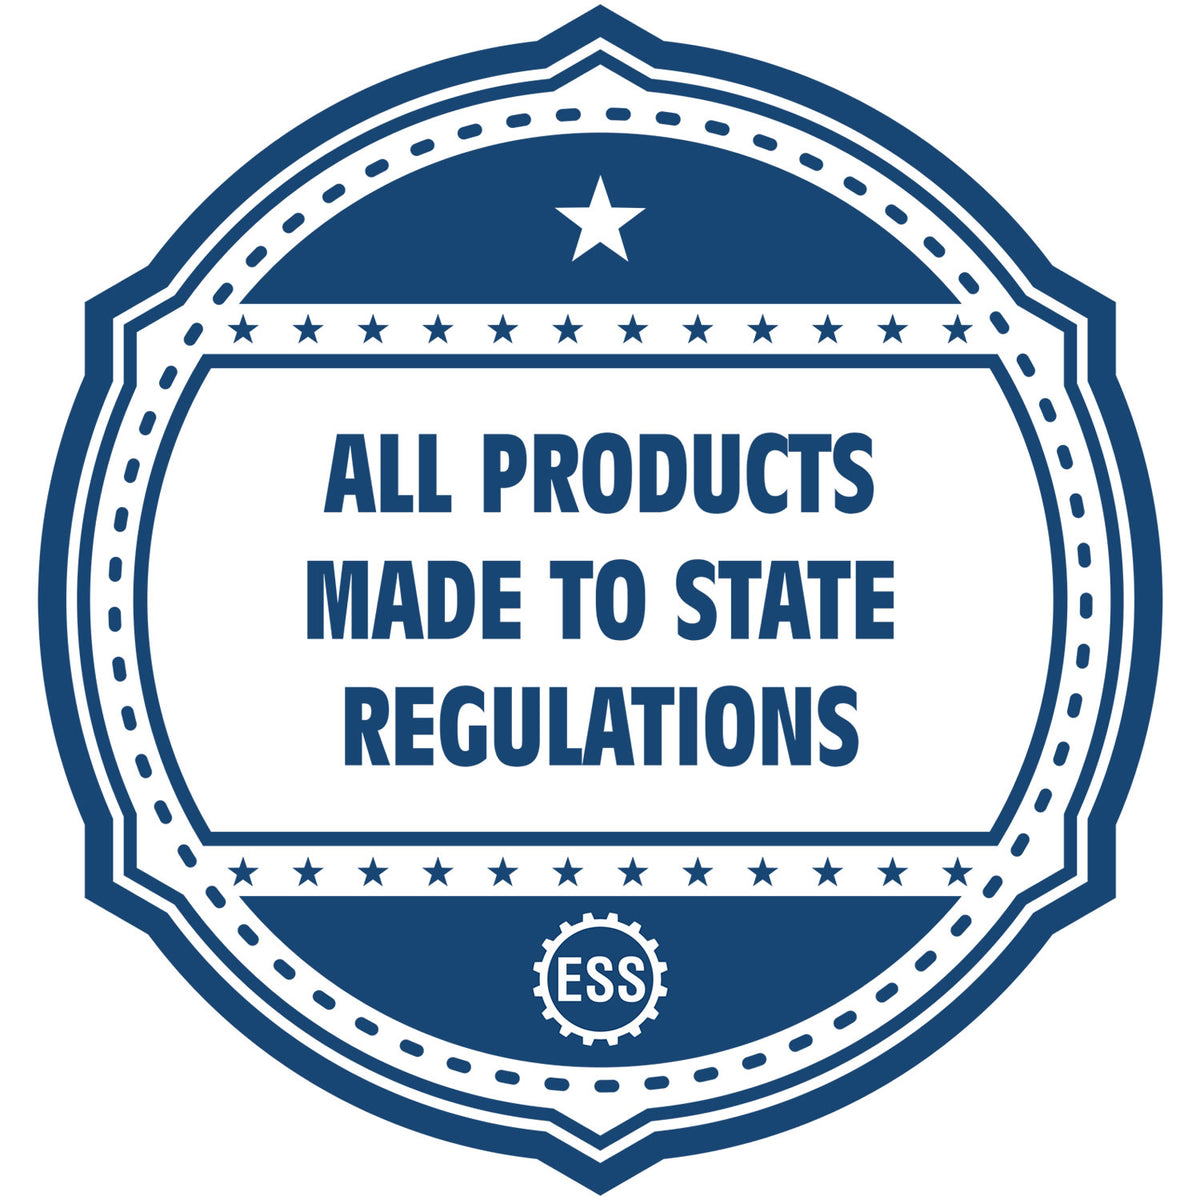 An icon or badge element for the Slim Pre-Inked State Seal Notary Stamp for New York showing that this product is made in compliance with state regulations.